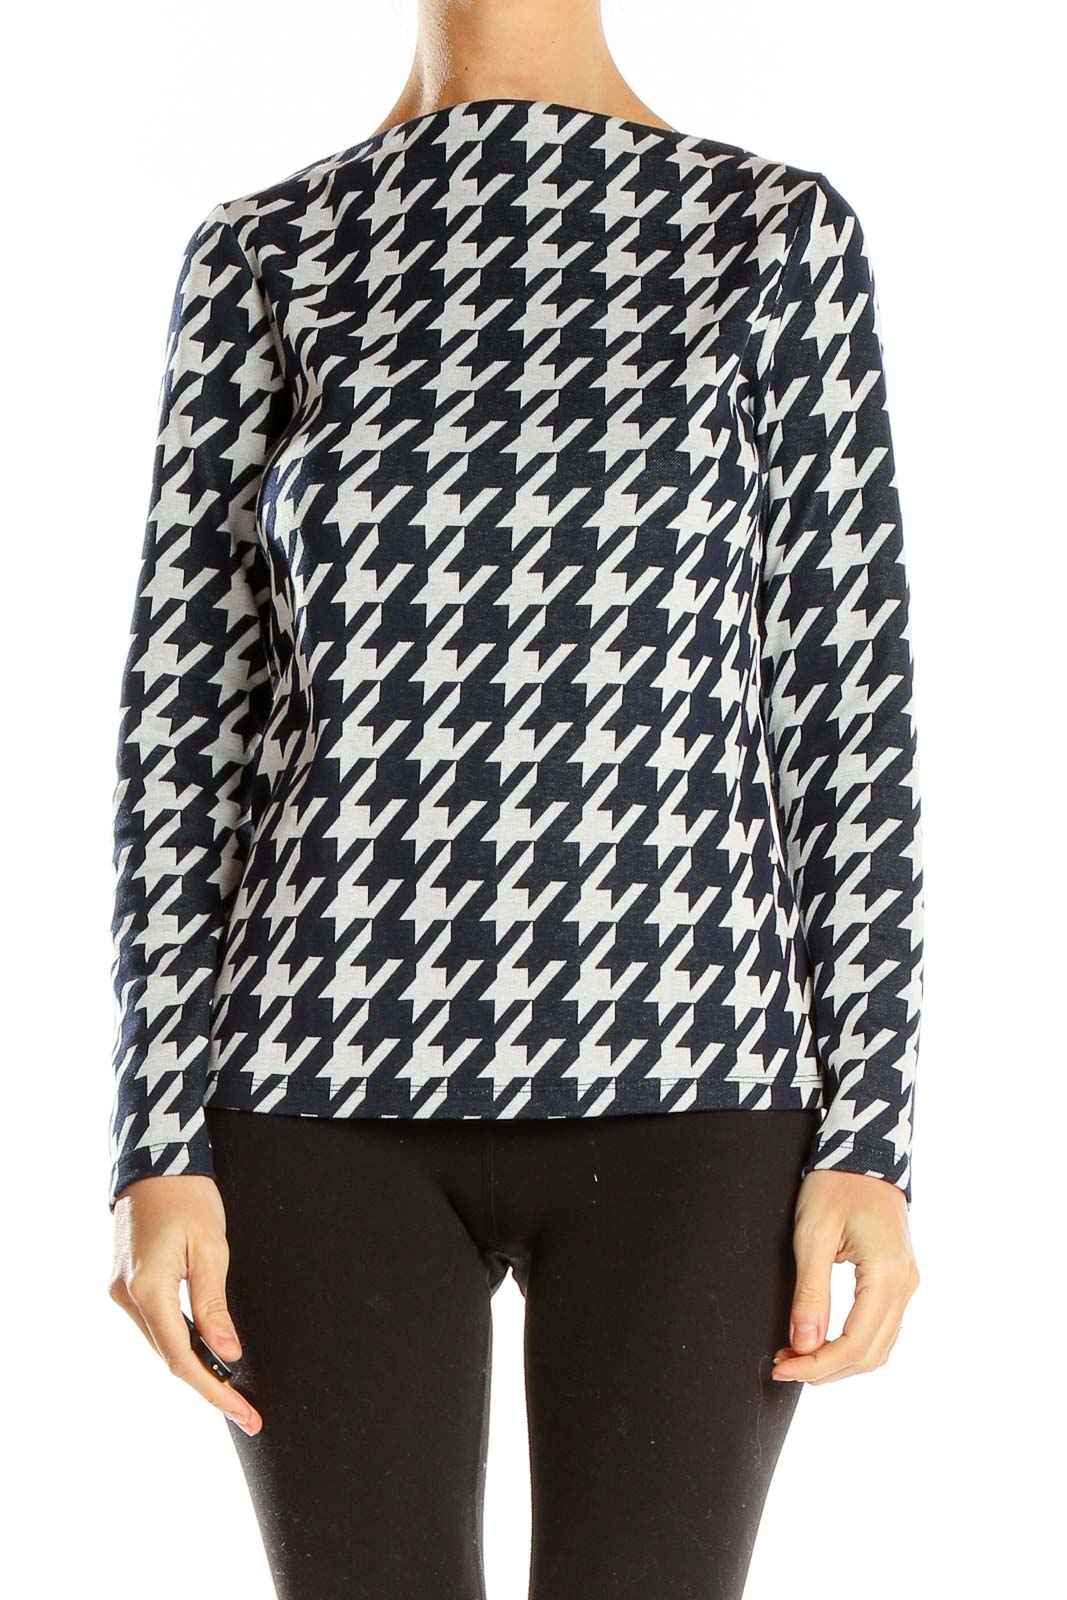 White Blue High Neck Houndstooth Top Front